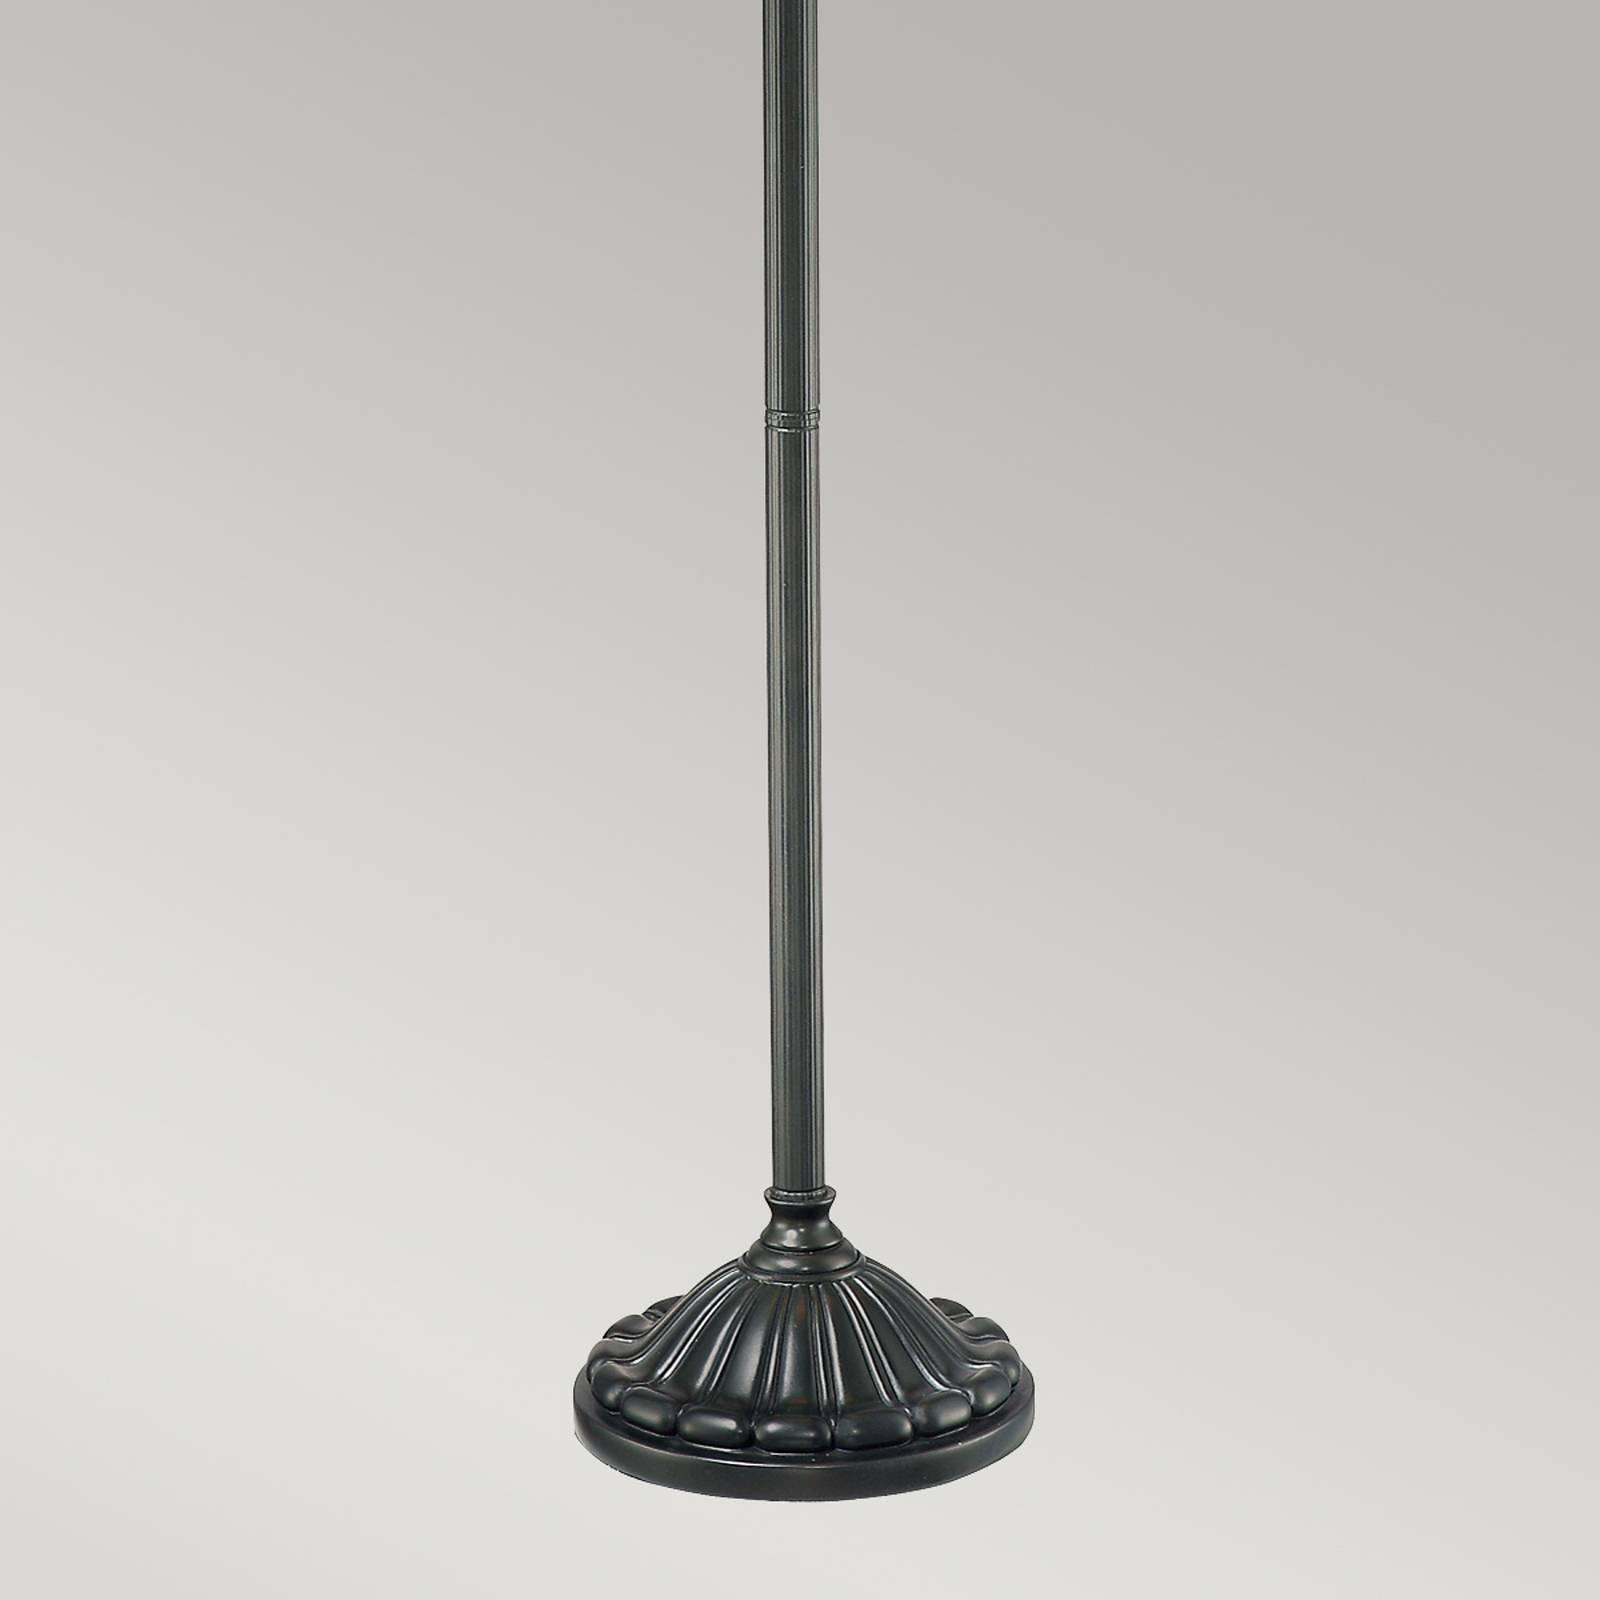 QUOIZEL Larissa floor lamp with a Tiffany-style lampshade